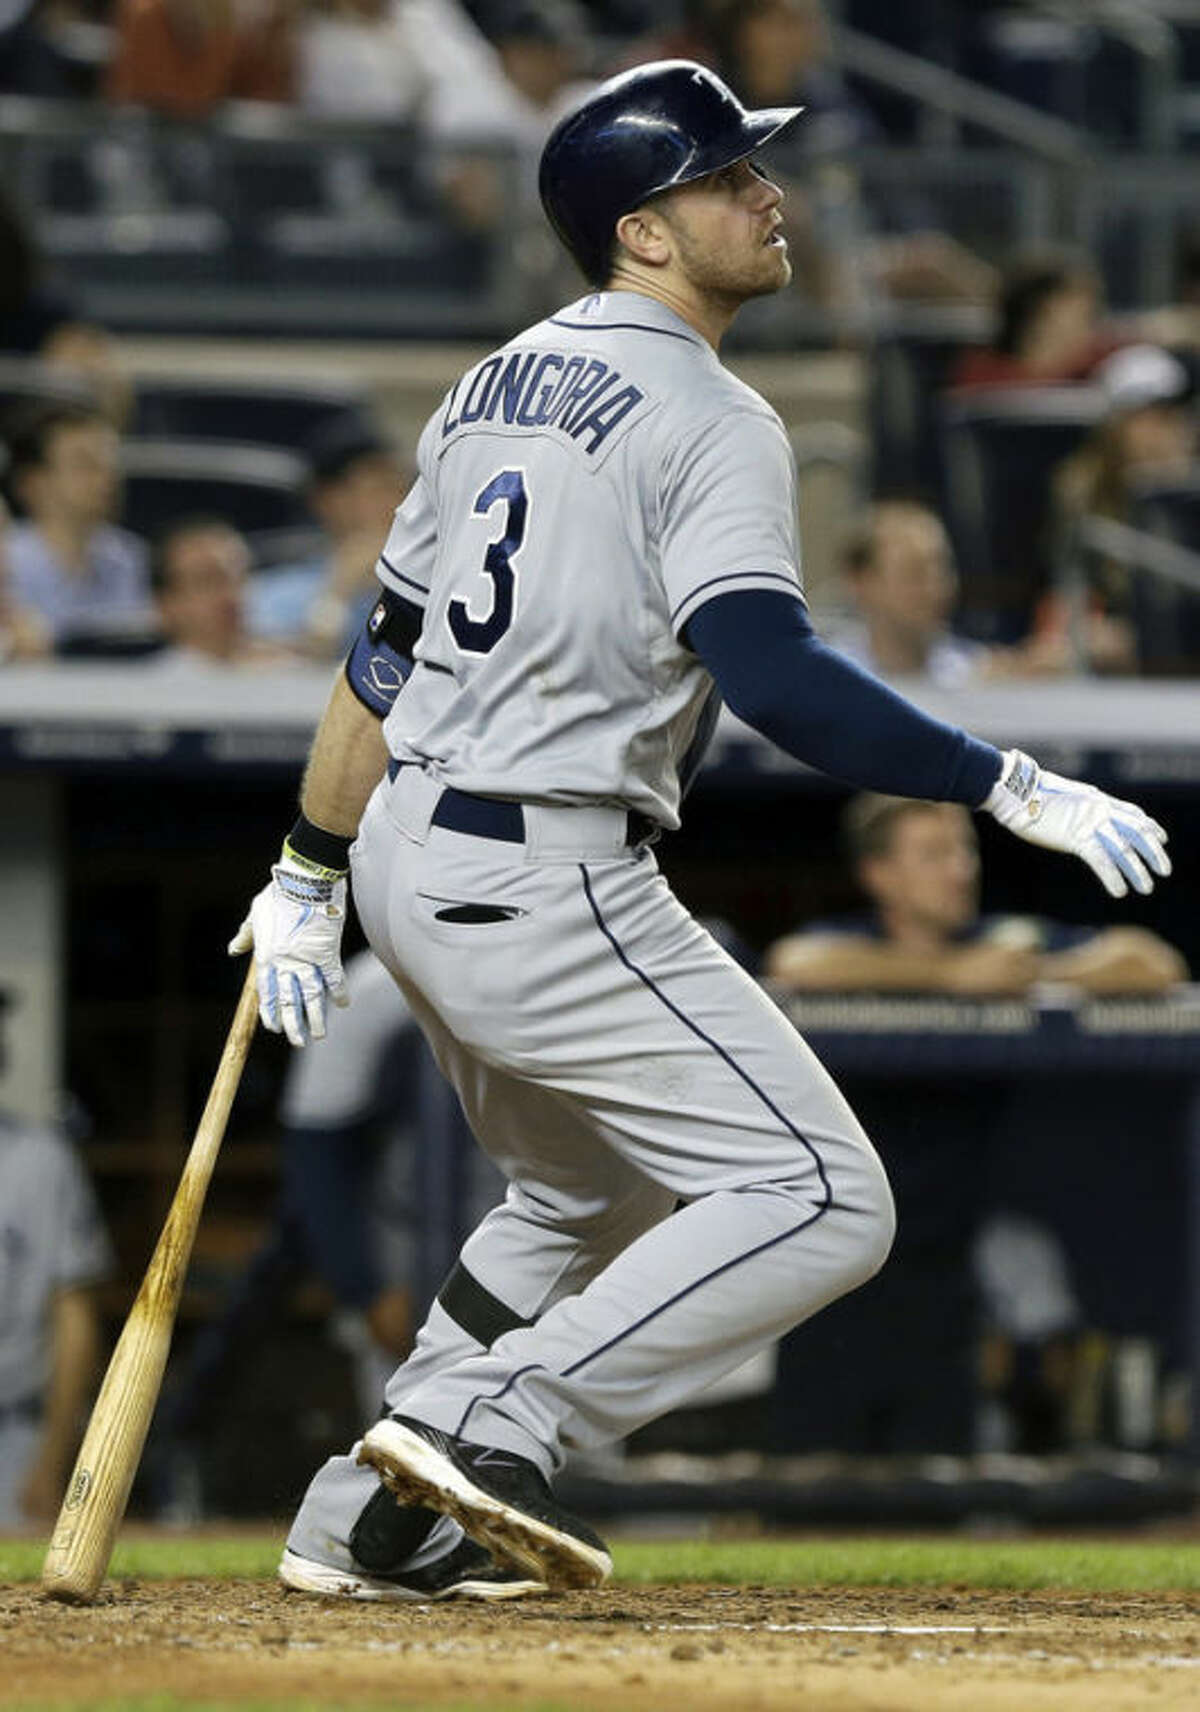 Tampa Bay Rays' Evan Longoria (3) watches a ball he hit for a home run during the eighth inning of a baseball game against the New York Yankees, Thursday, June 20, 2013, in New York. (AP Photo/Frank Franklin II)